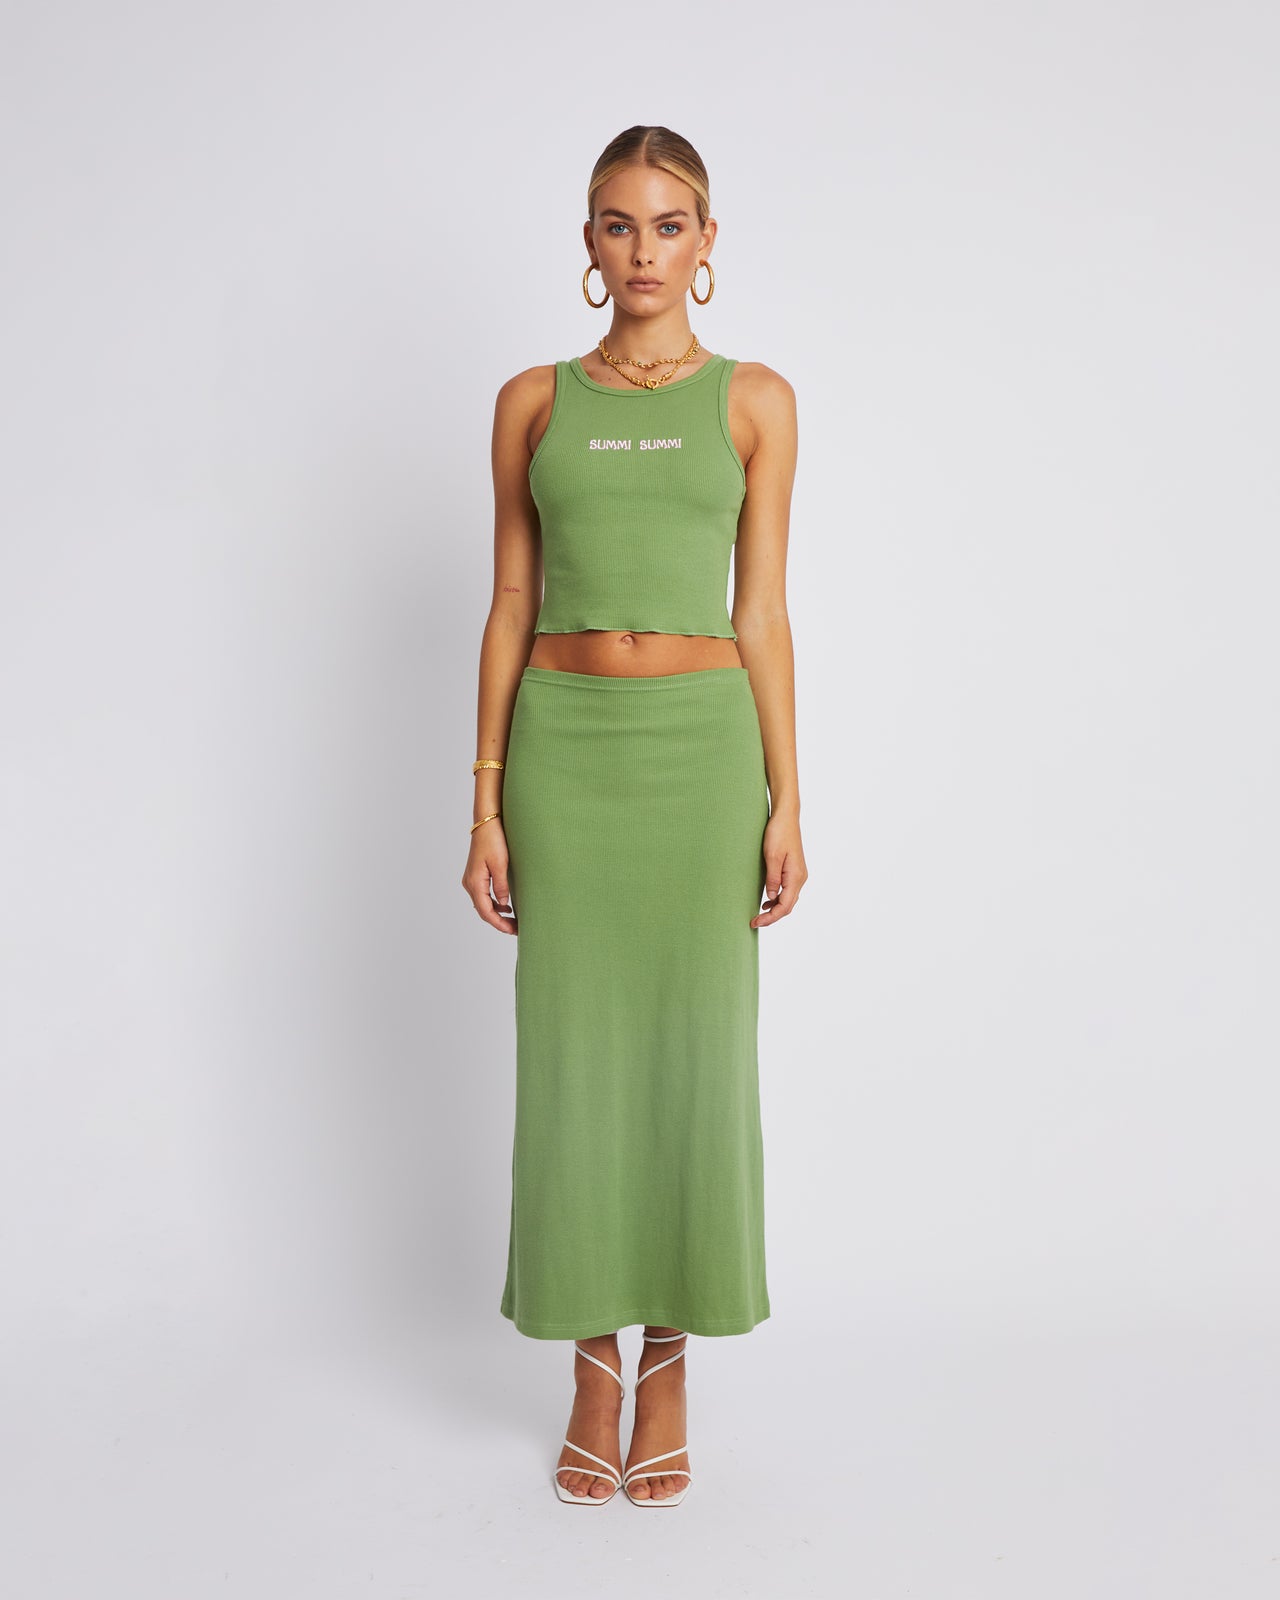 CROPPED RACER TANK - OLIVE